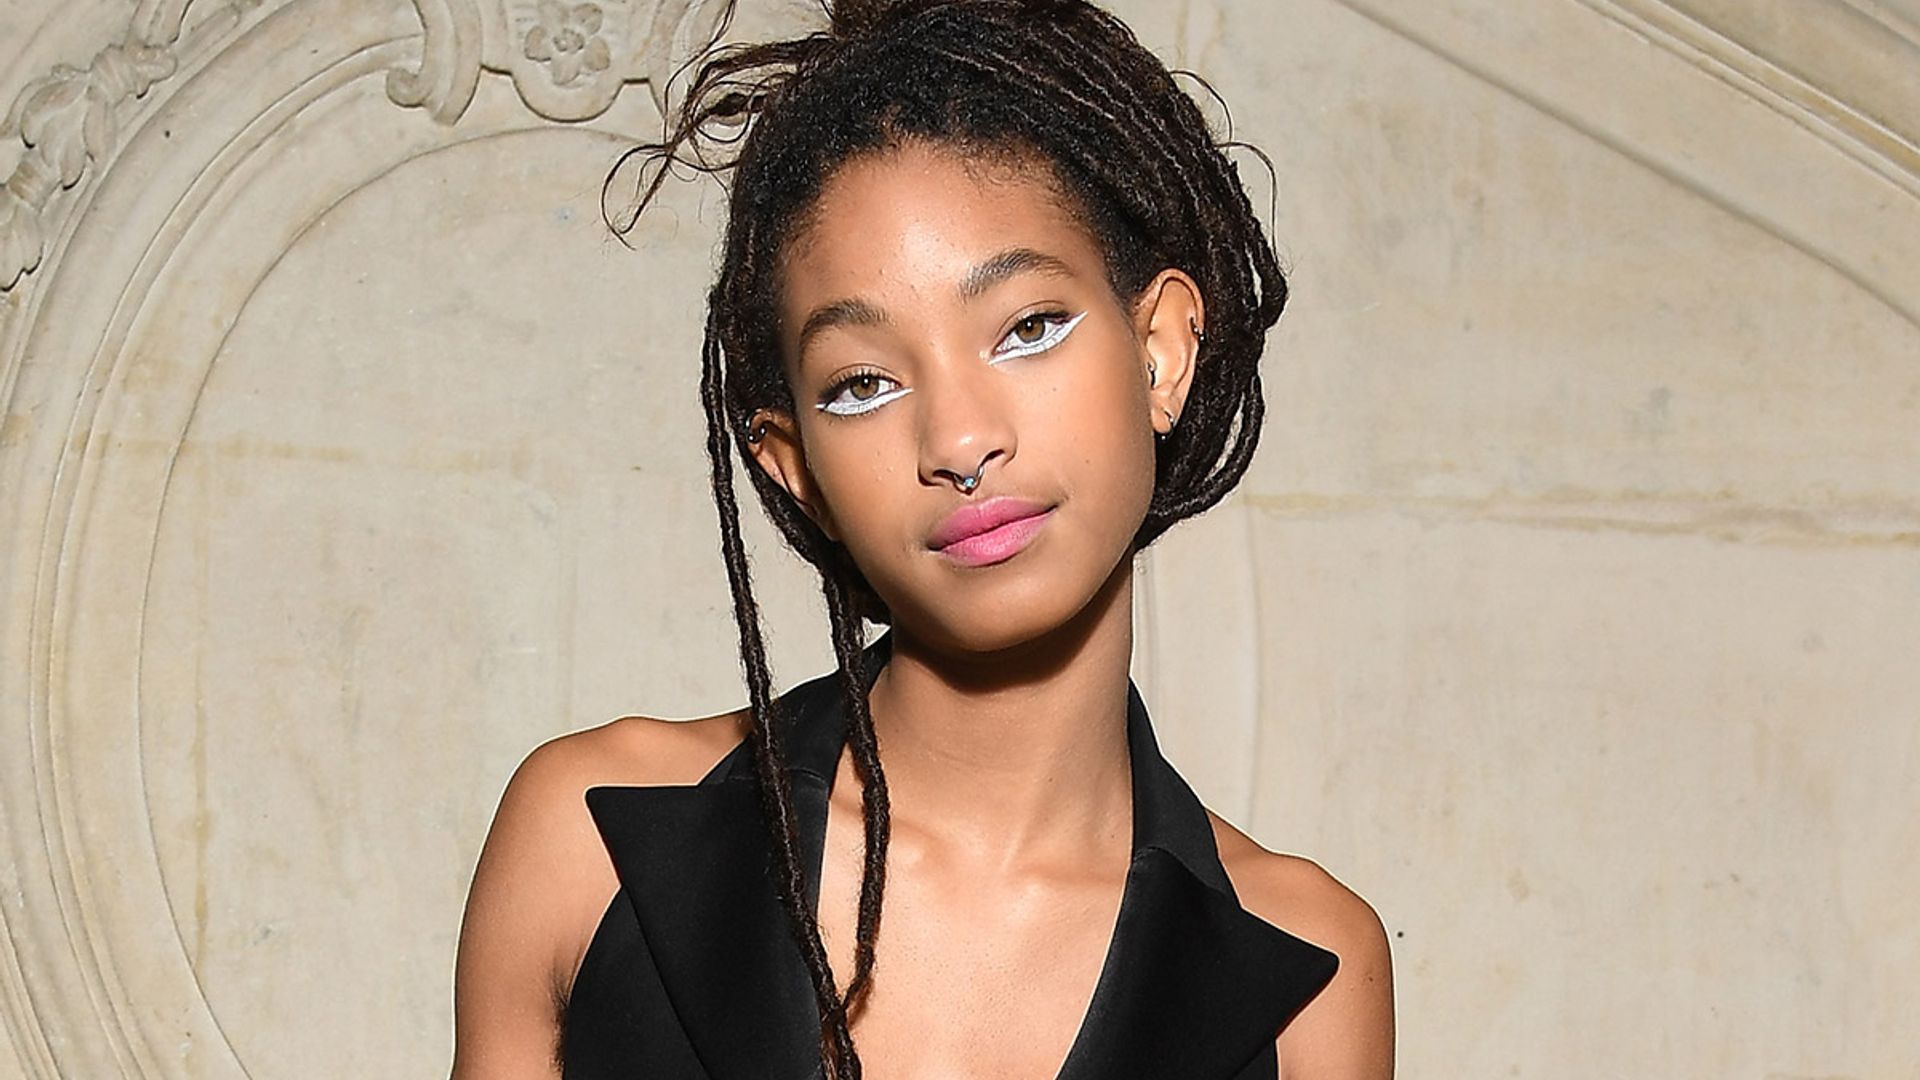 willow smith shocks fans with extreme new look